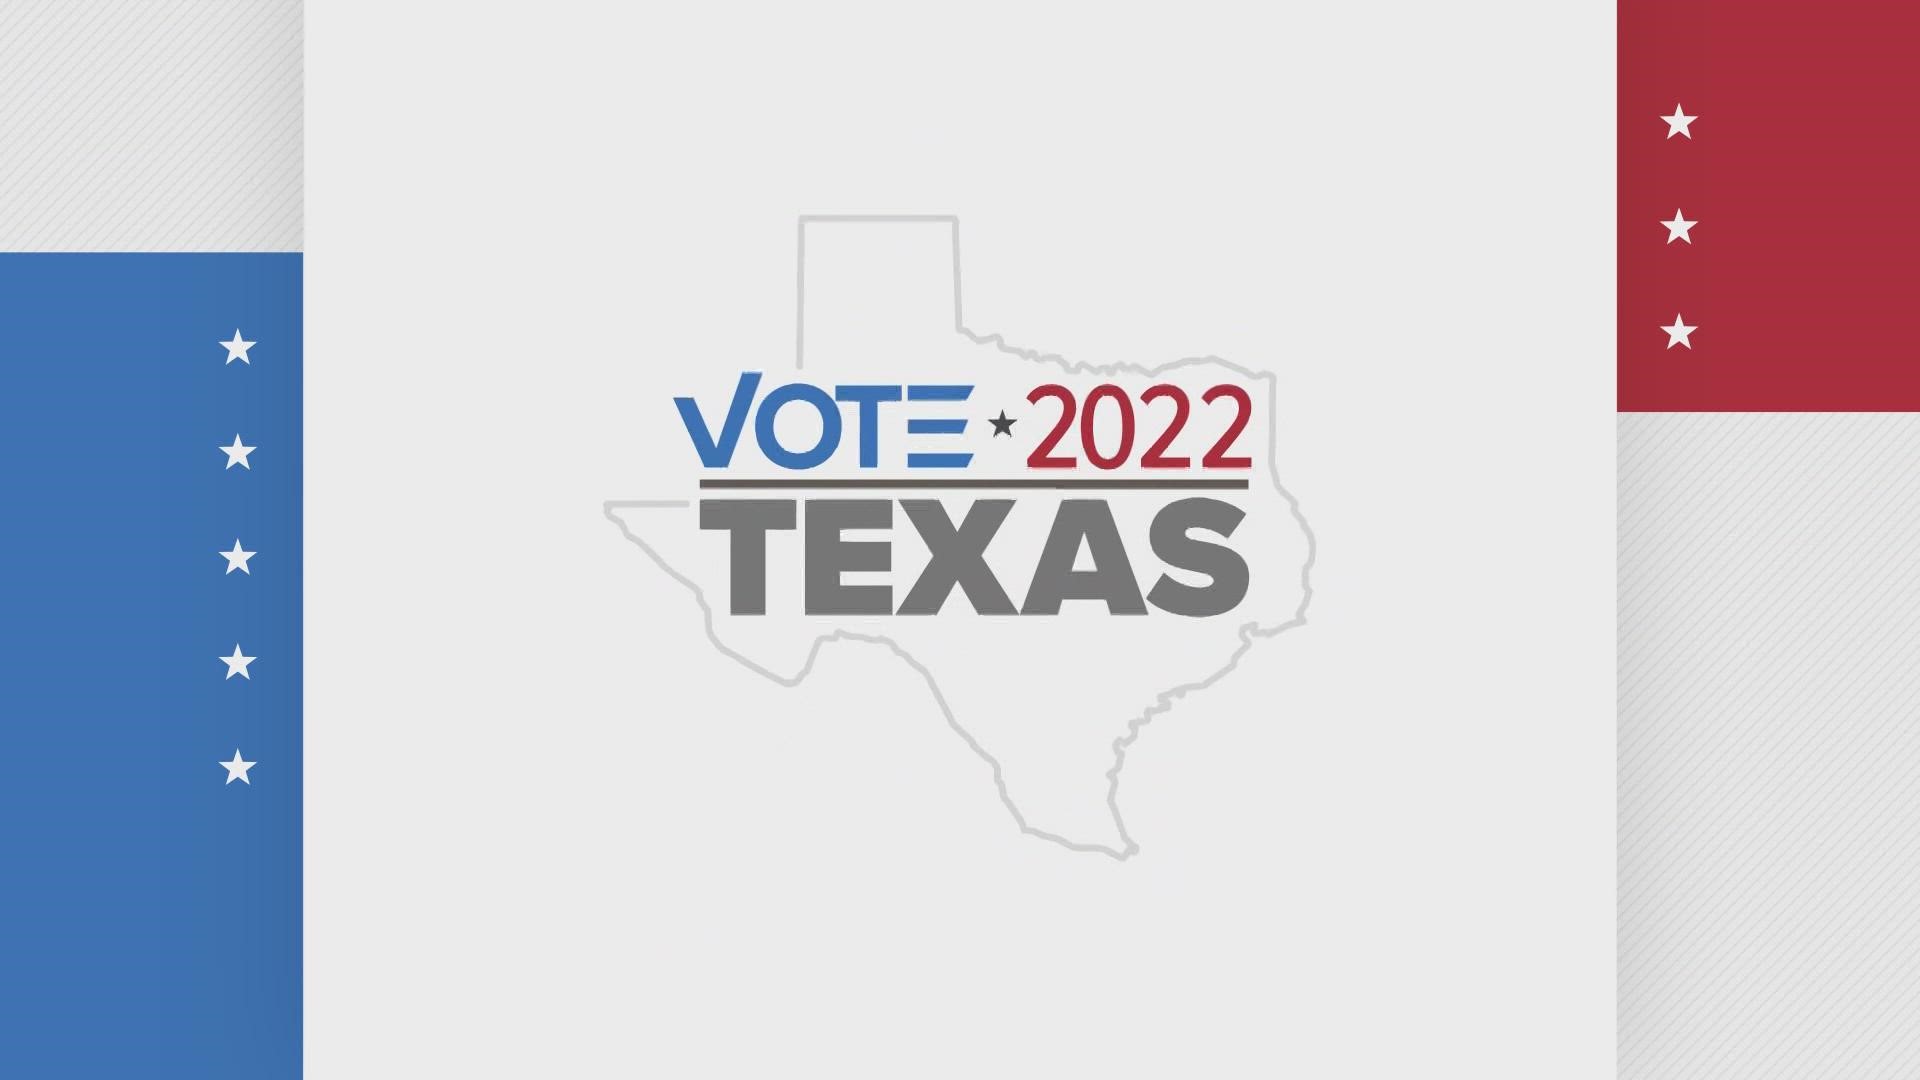 Part 1 of the "Texas Decides" poll also shows that a vast majority of voters have already settled into their decisions for the November elections.